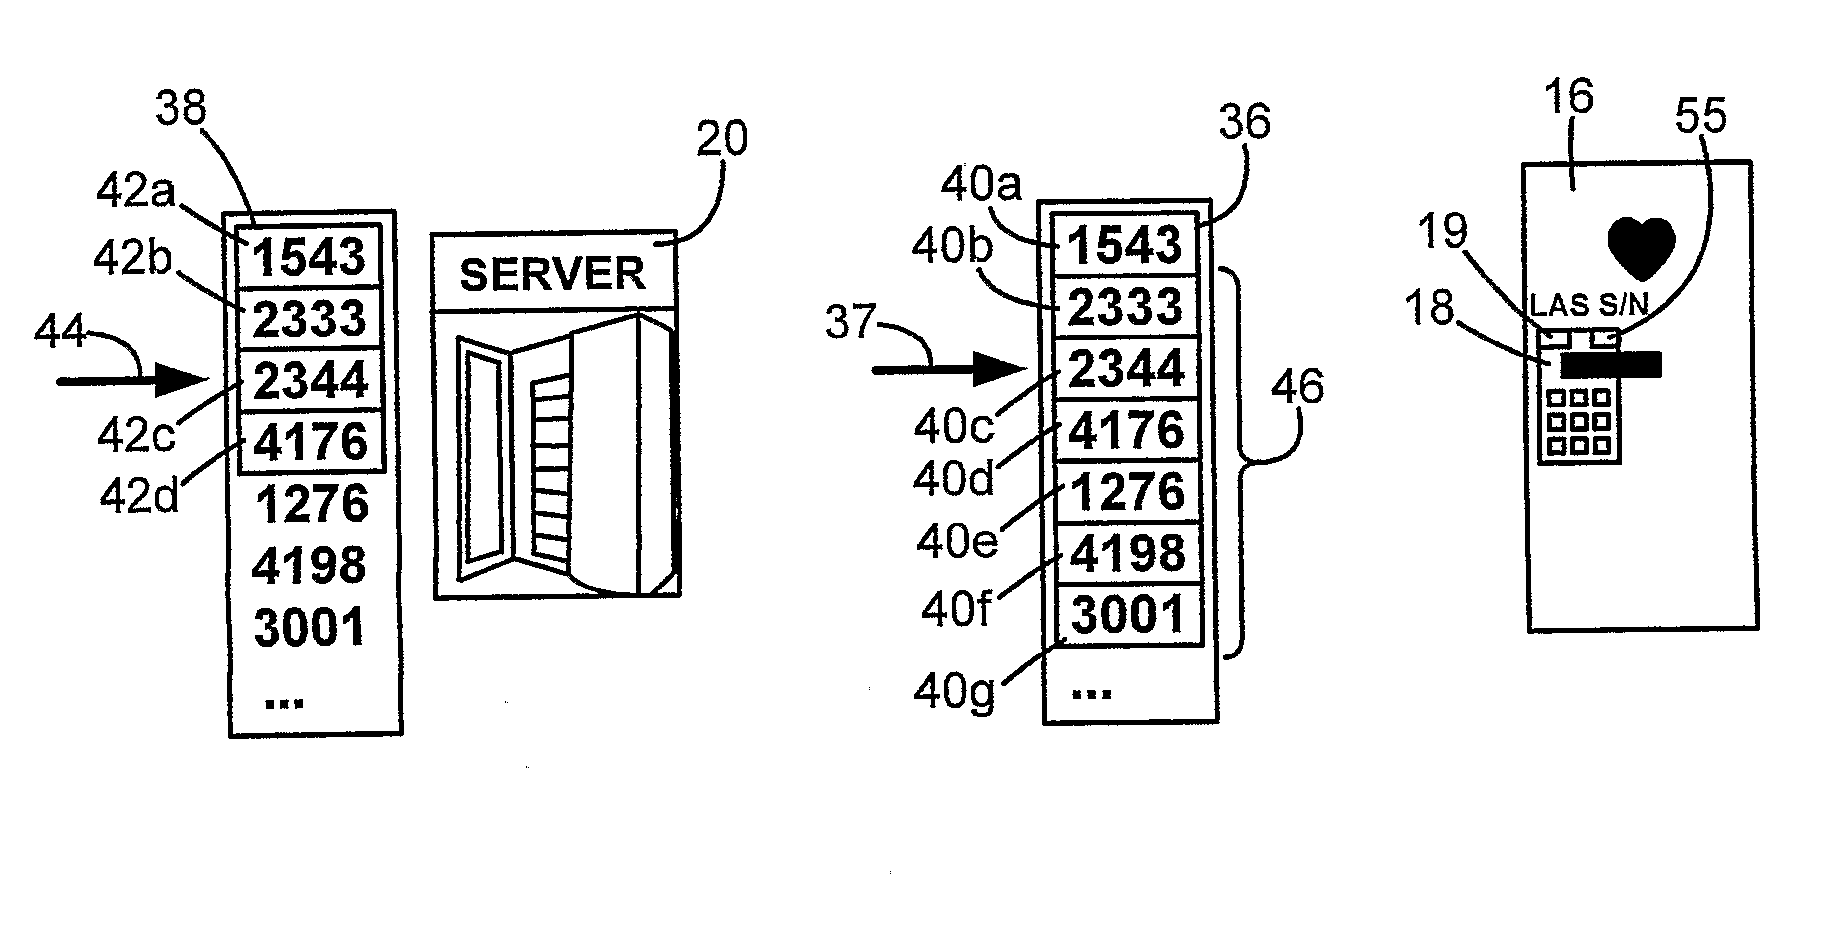 Method of Gaining Access to a Device